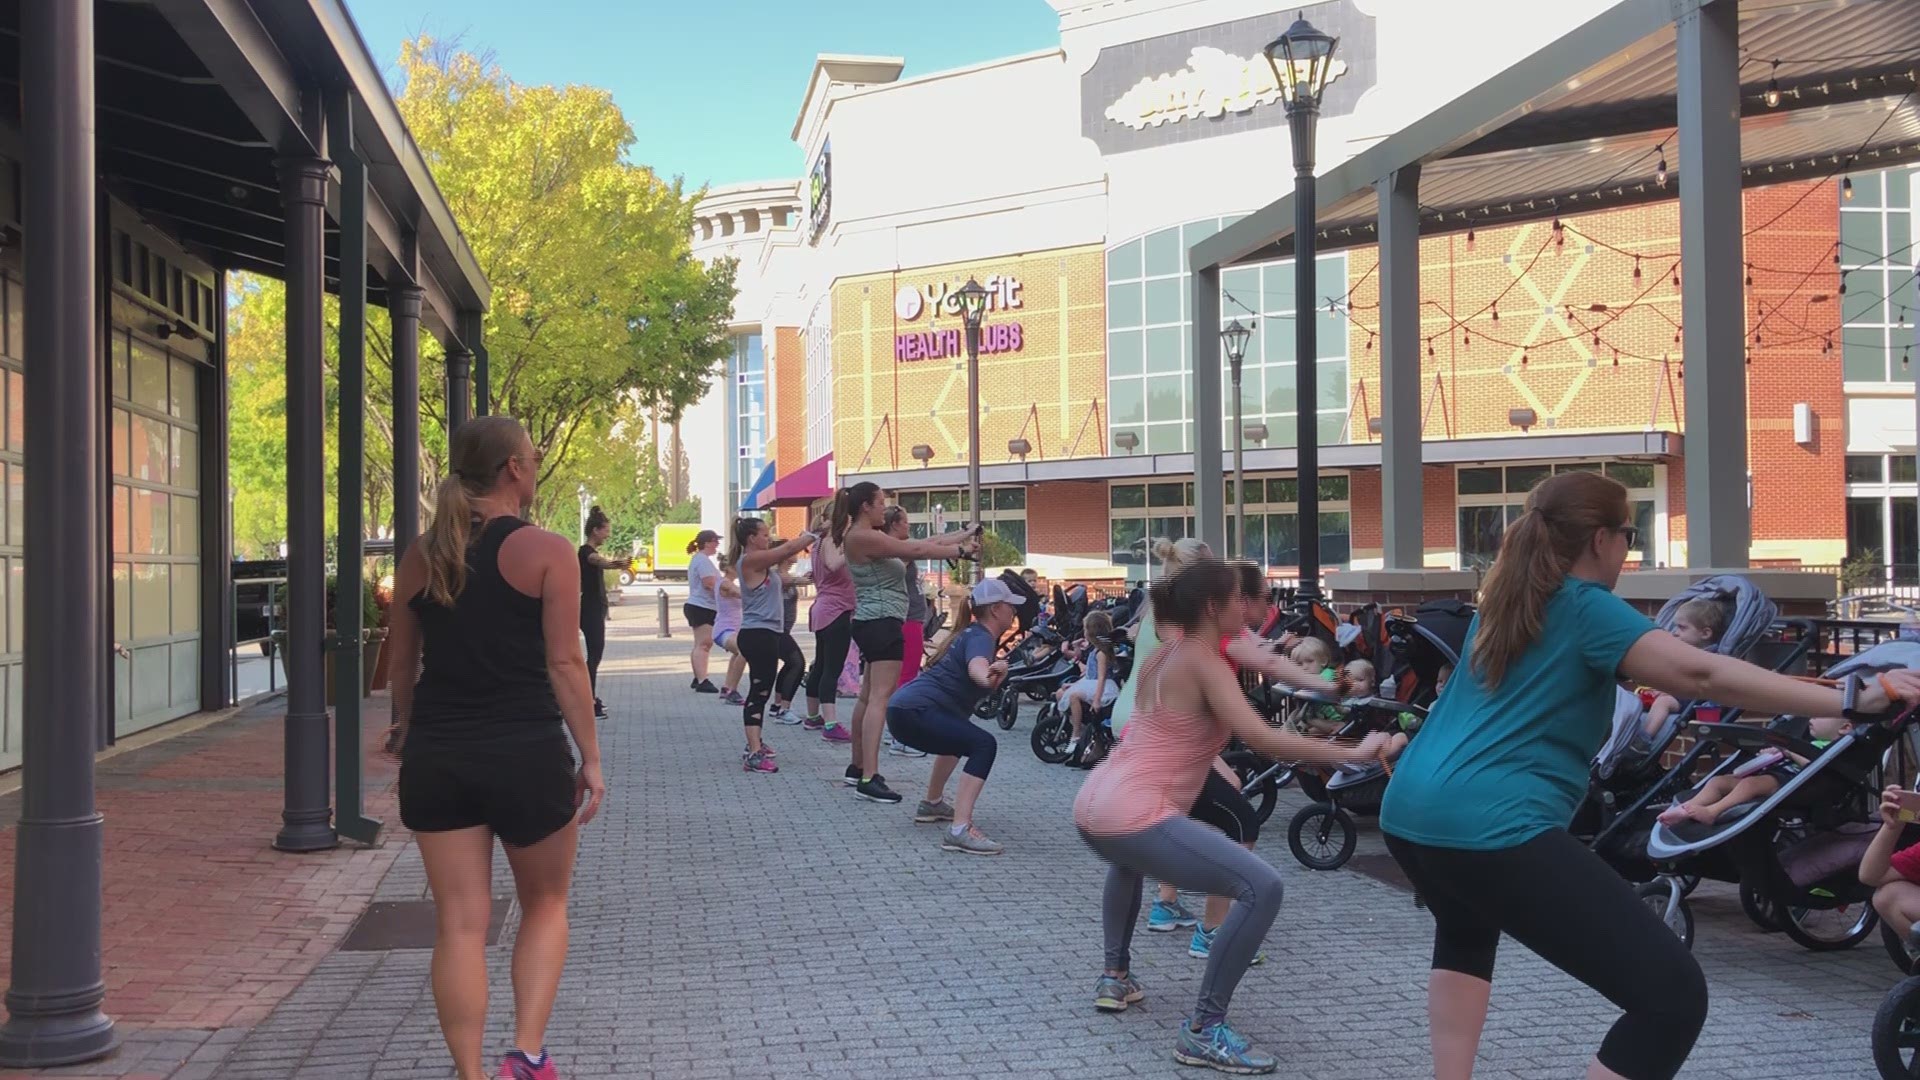 Video of Fit4moms trading in their weights for strollers.